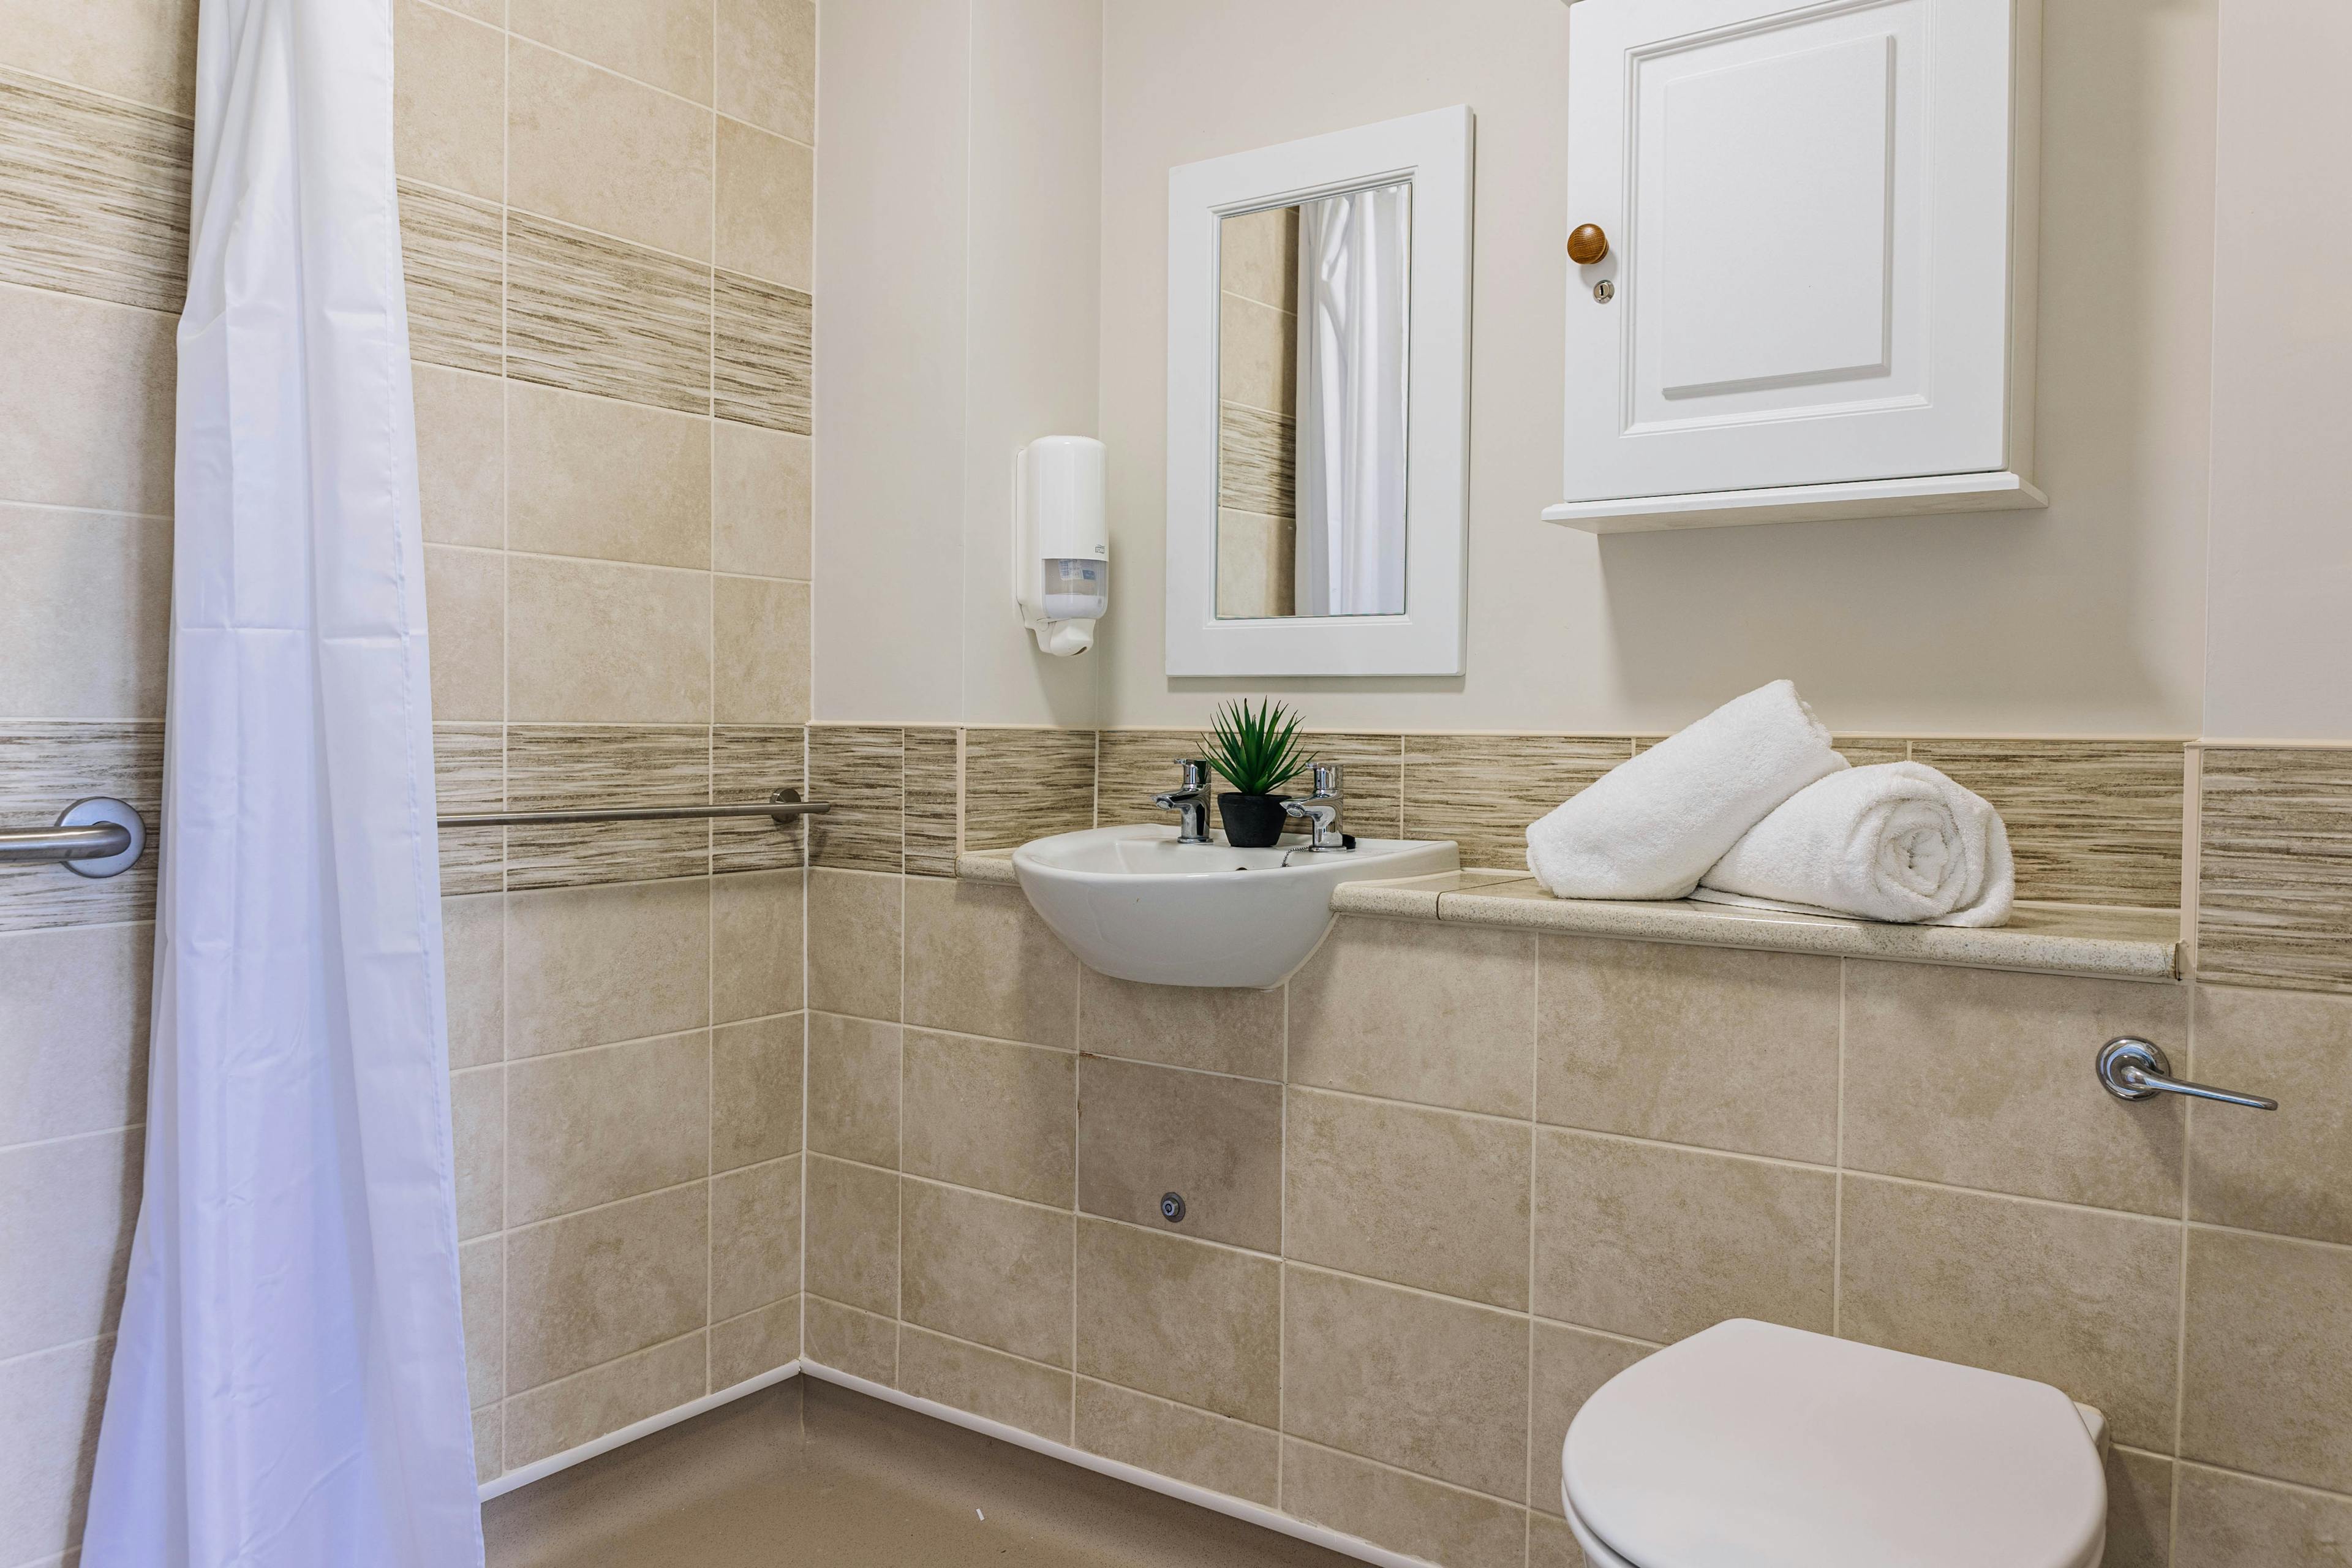 Bathroom at Oak Grange Care Home in Chester, Cheshire